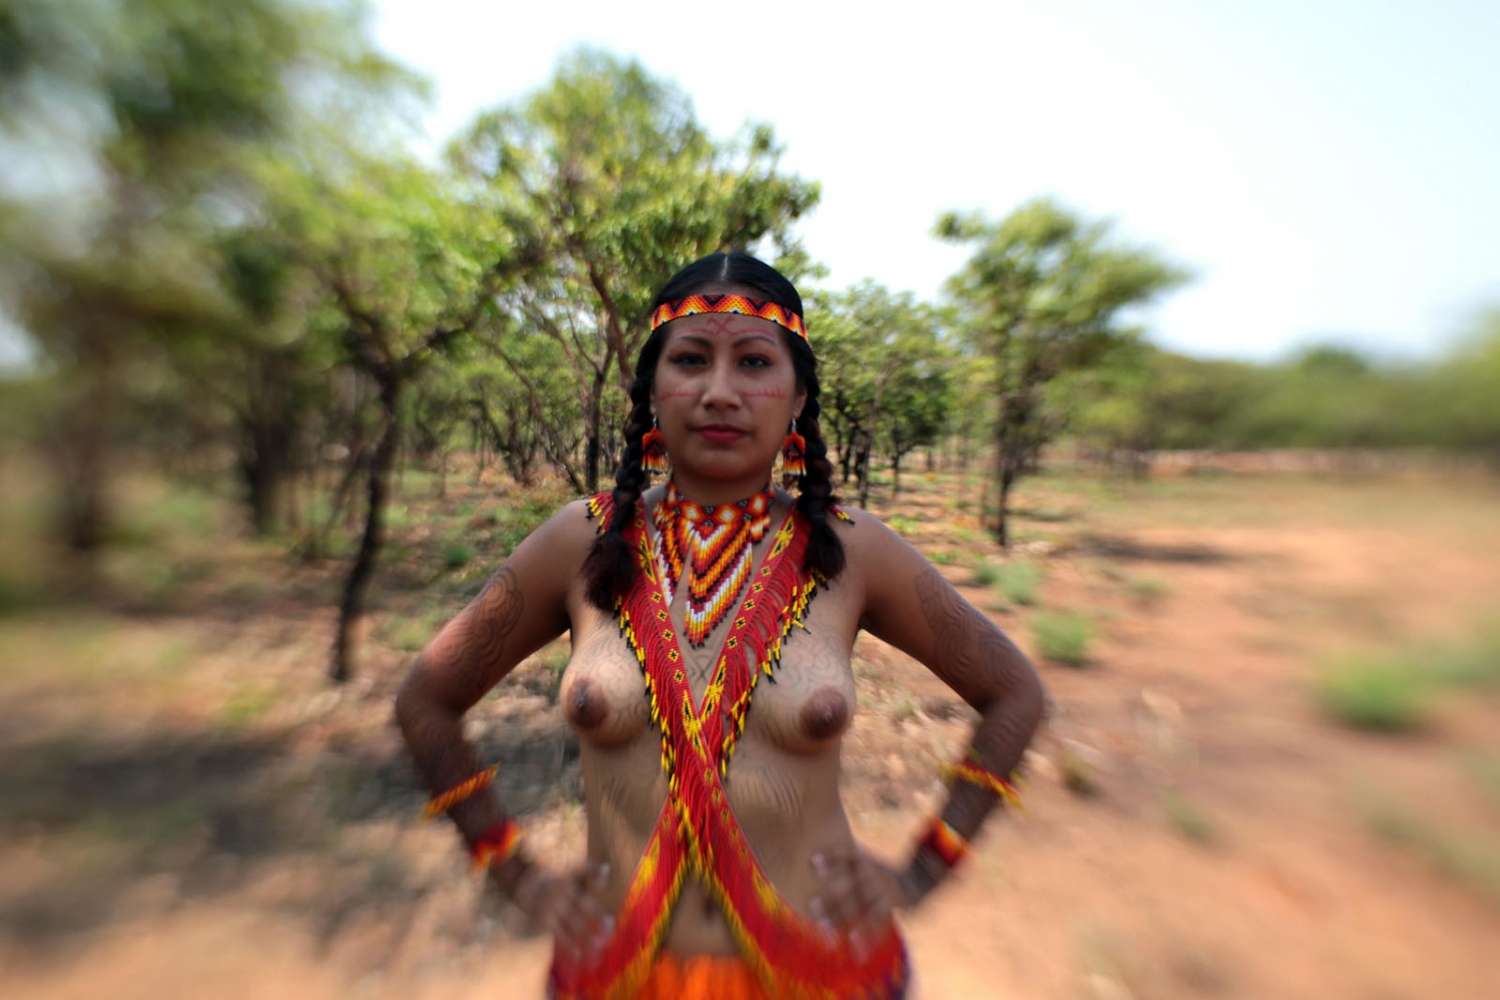 Nude women with tribal people